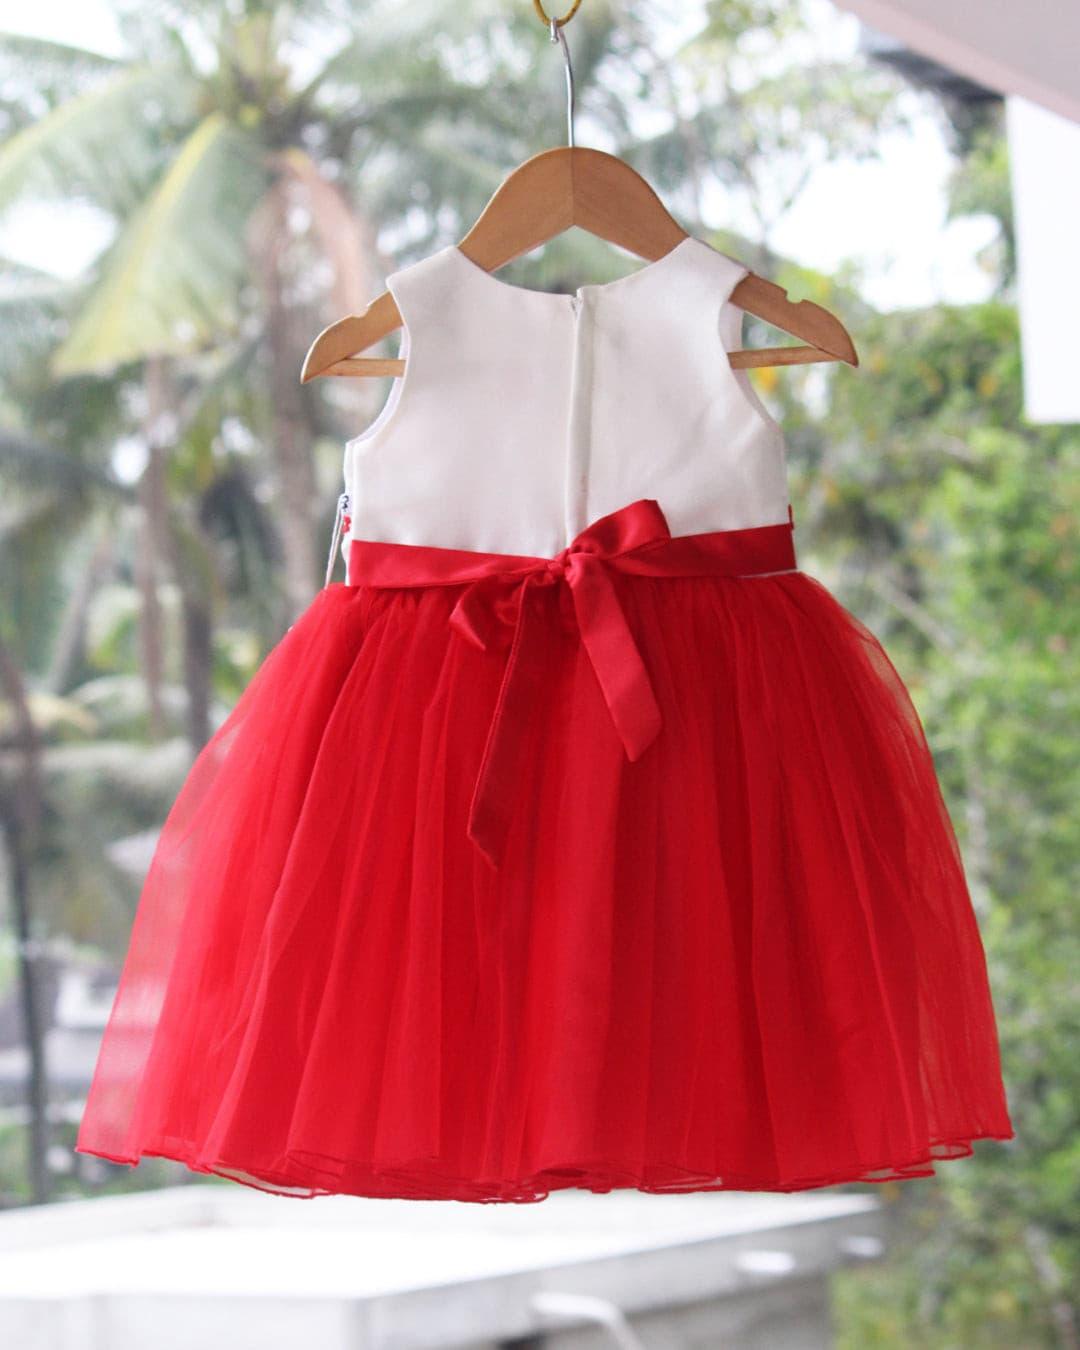 Red Colour Premium Thread Embroidery Frock.
Fabric: Bright Red mono net with premium same colour thread work detailing on the yoke portion  Beautifully designed outfit for Baby girls with smooth lining for co